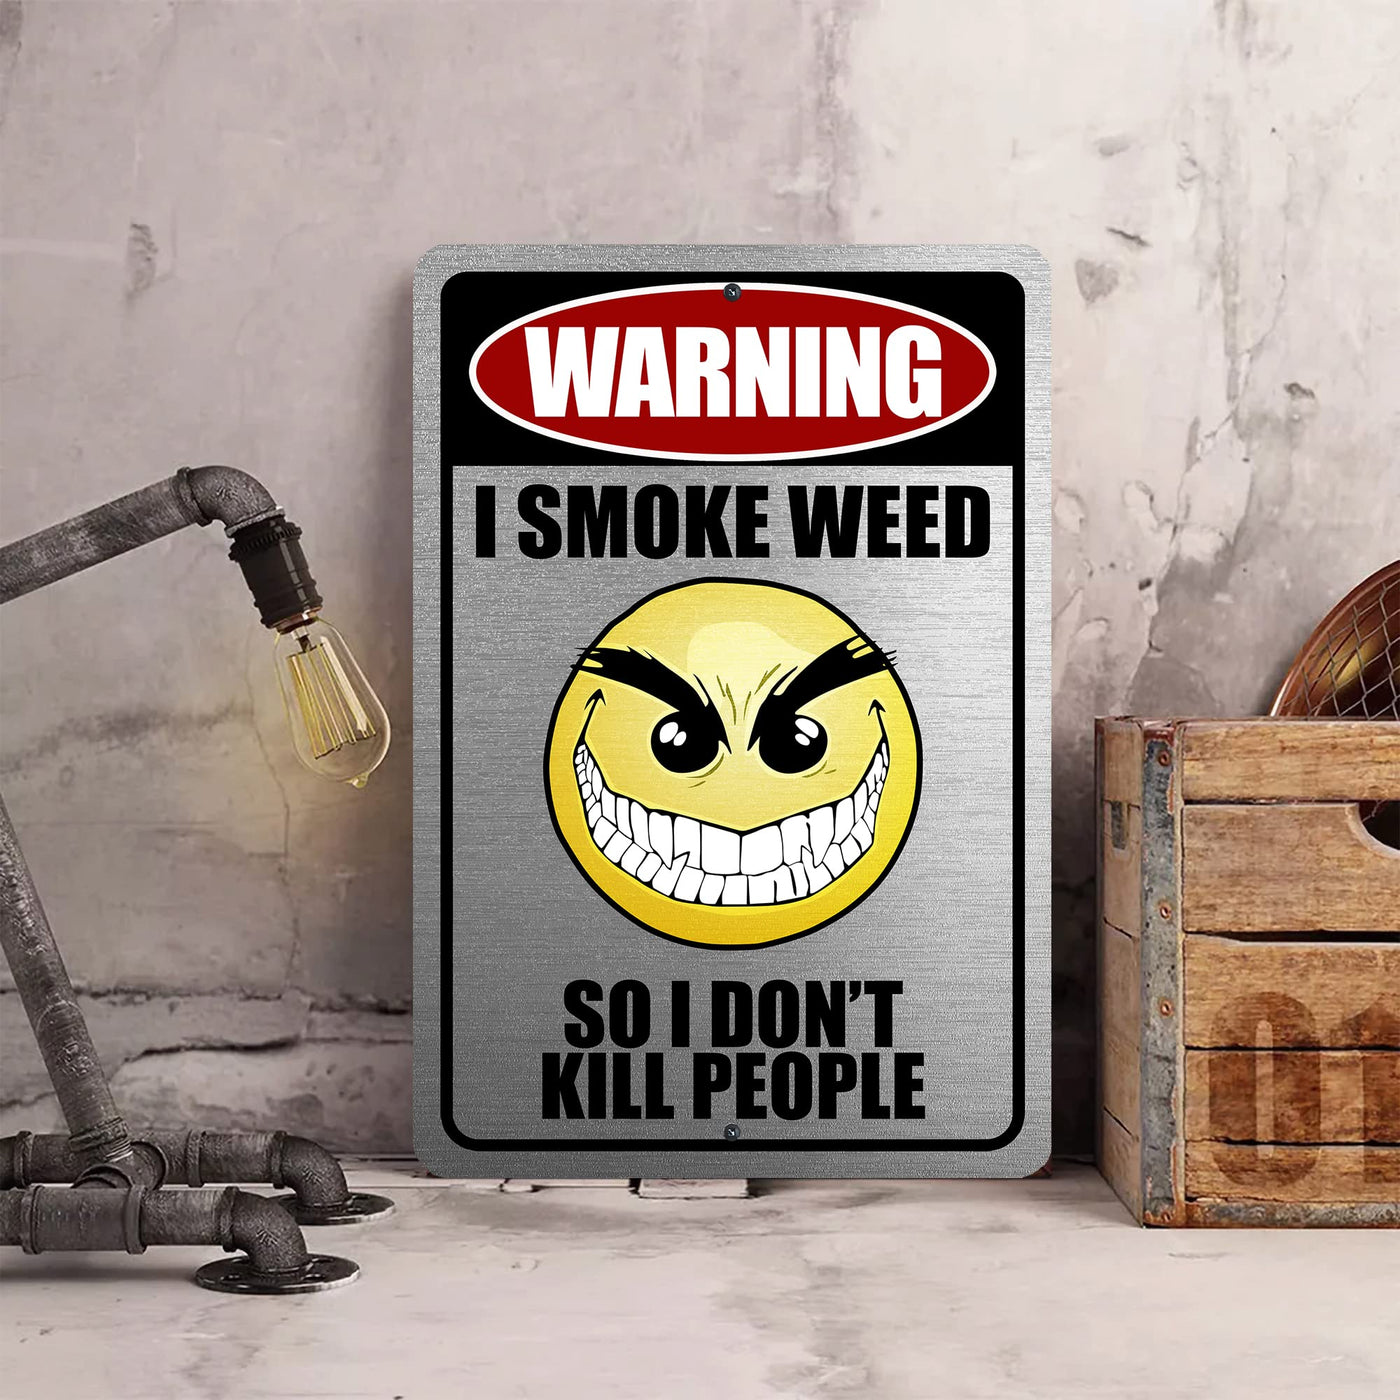 Warning - I Smoke Weed Metal Signs Vintage Wall Art -8 x 12" Funny Retro Emoji Sign for Bar, Man Cave, Garage, Pub, Shop- Rustic Tin Outdoors Sign for Home-Kitchen-Patio-Beach House-Deck Decor!